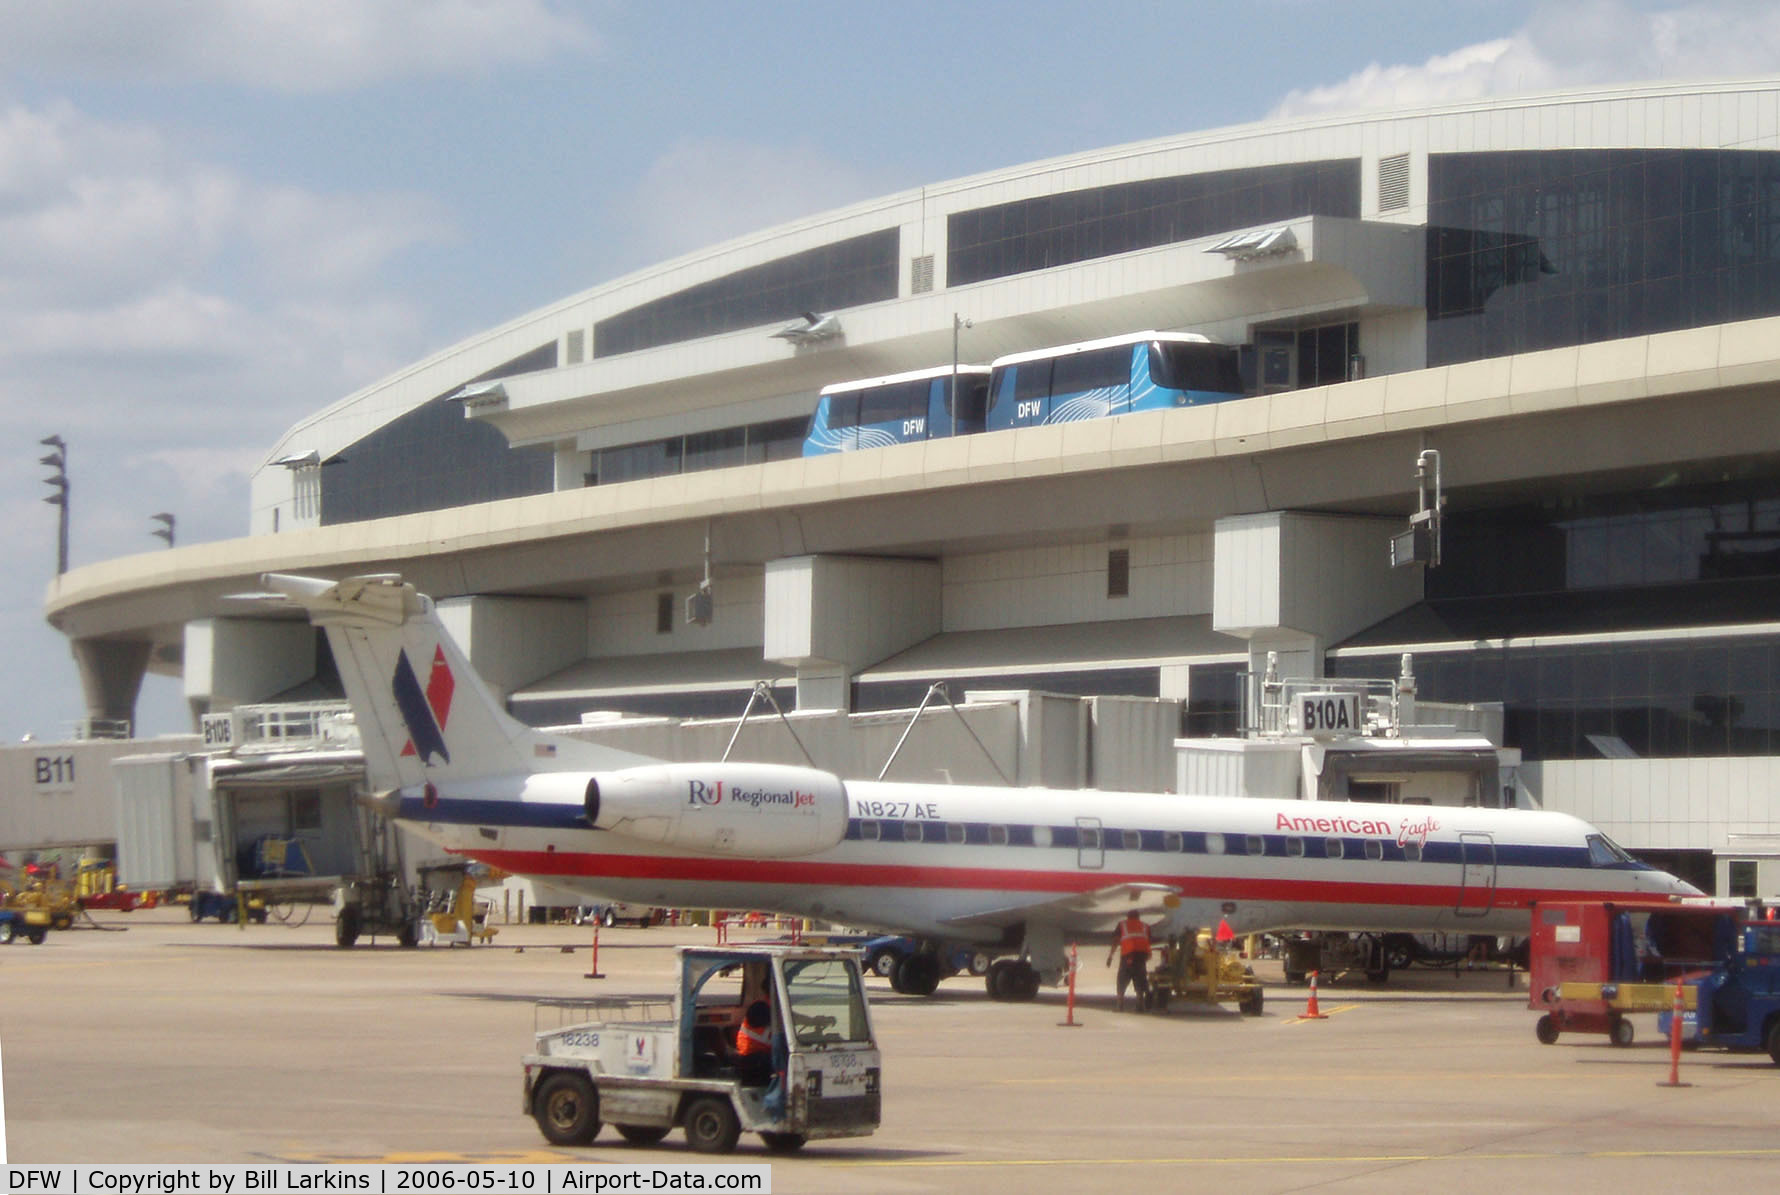 Dallas/fort Worth International Airport (DFW) - One of AAs Terminal connections